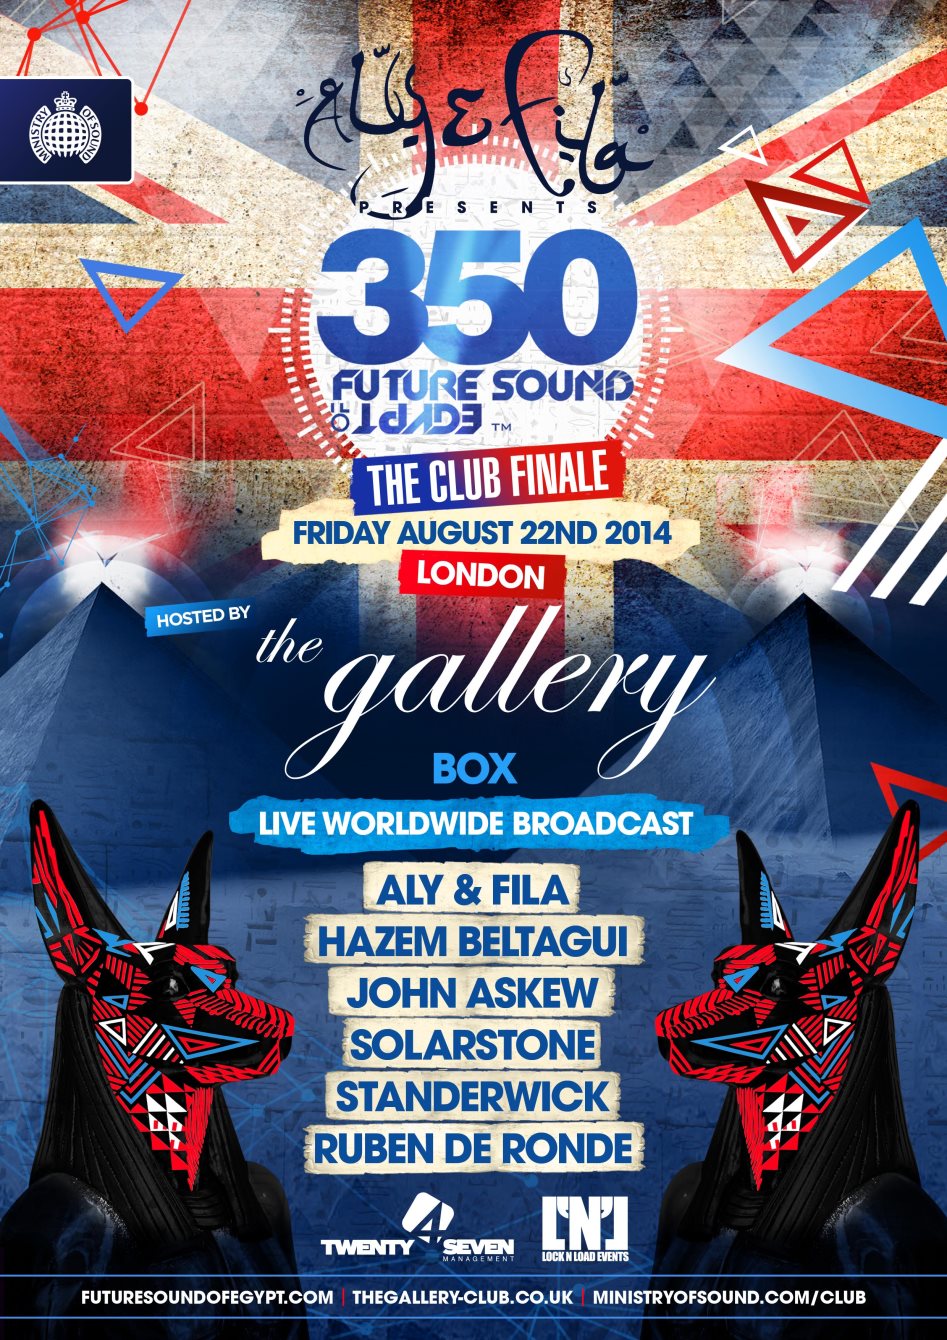 Udvej sig selv Unravel Aly & Fila: Fsoe 350 The Club Finale at Ministry Of Sound, London